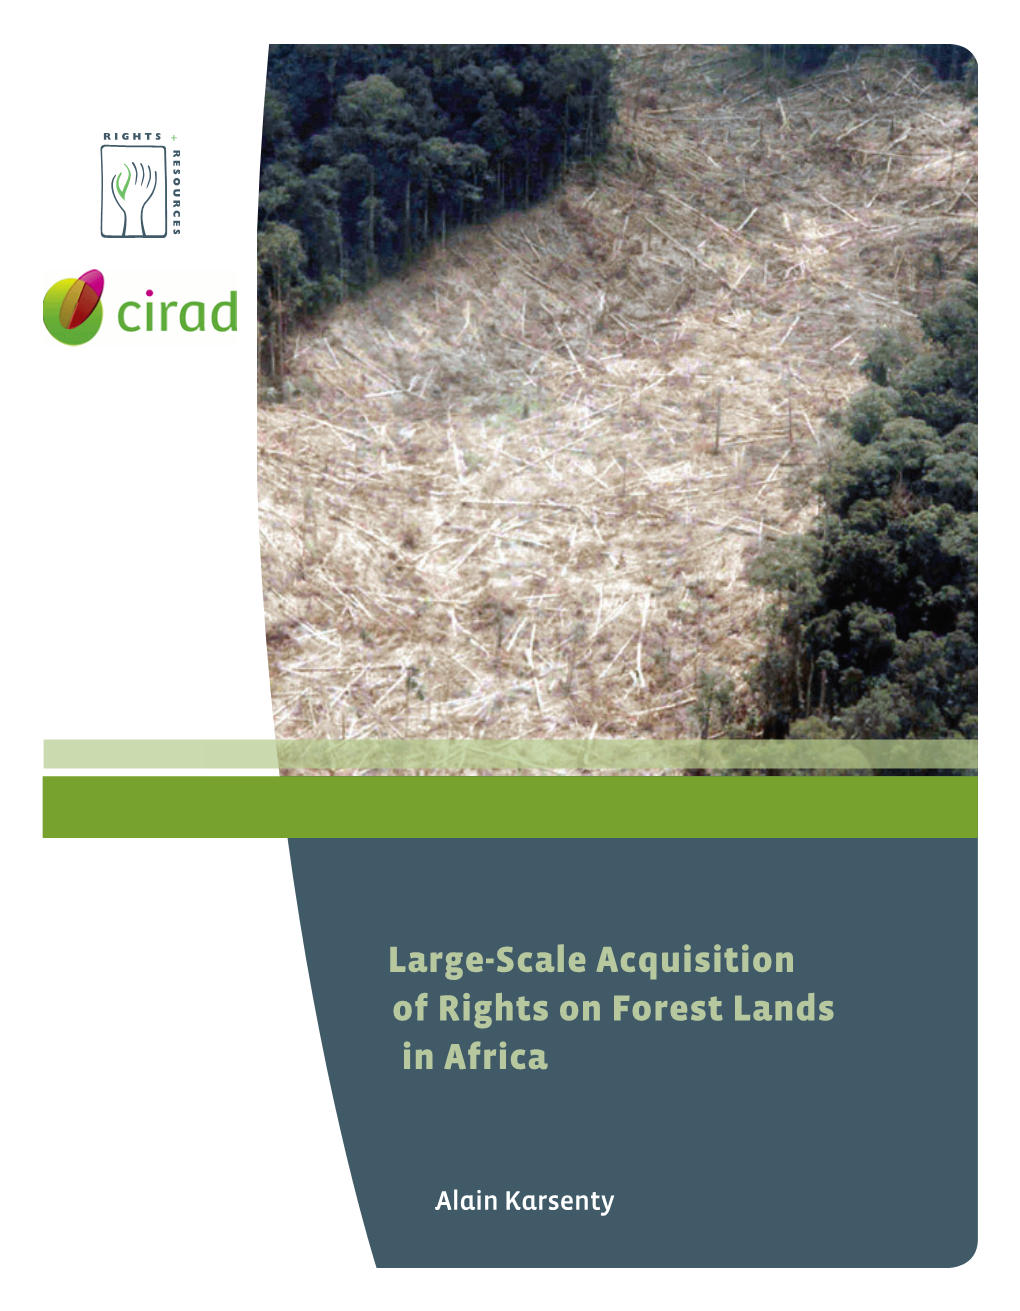 Large-Scale Acquisition of Rights on Forest Lands in Africa